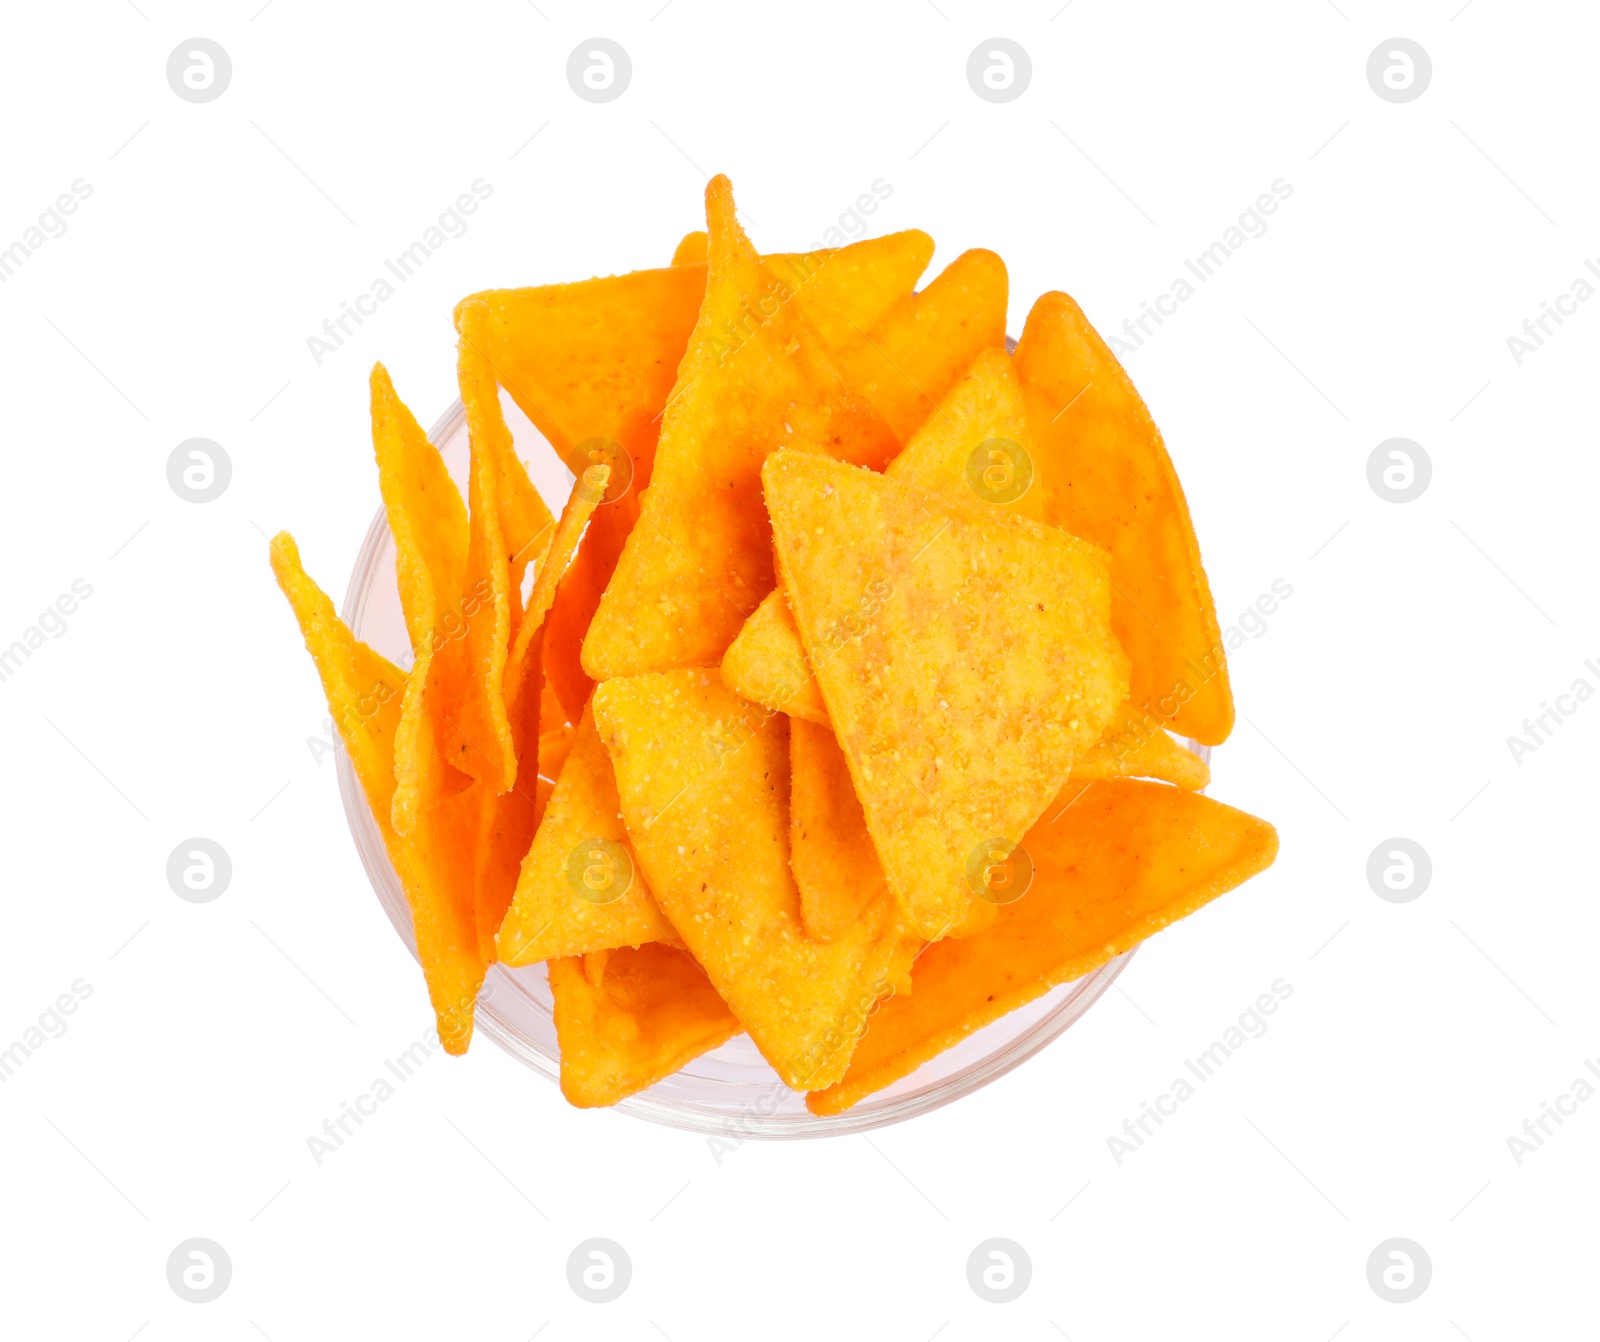 Photo of Bowl of tasty tortilla chips (nachos) on white background, top view